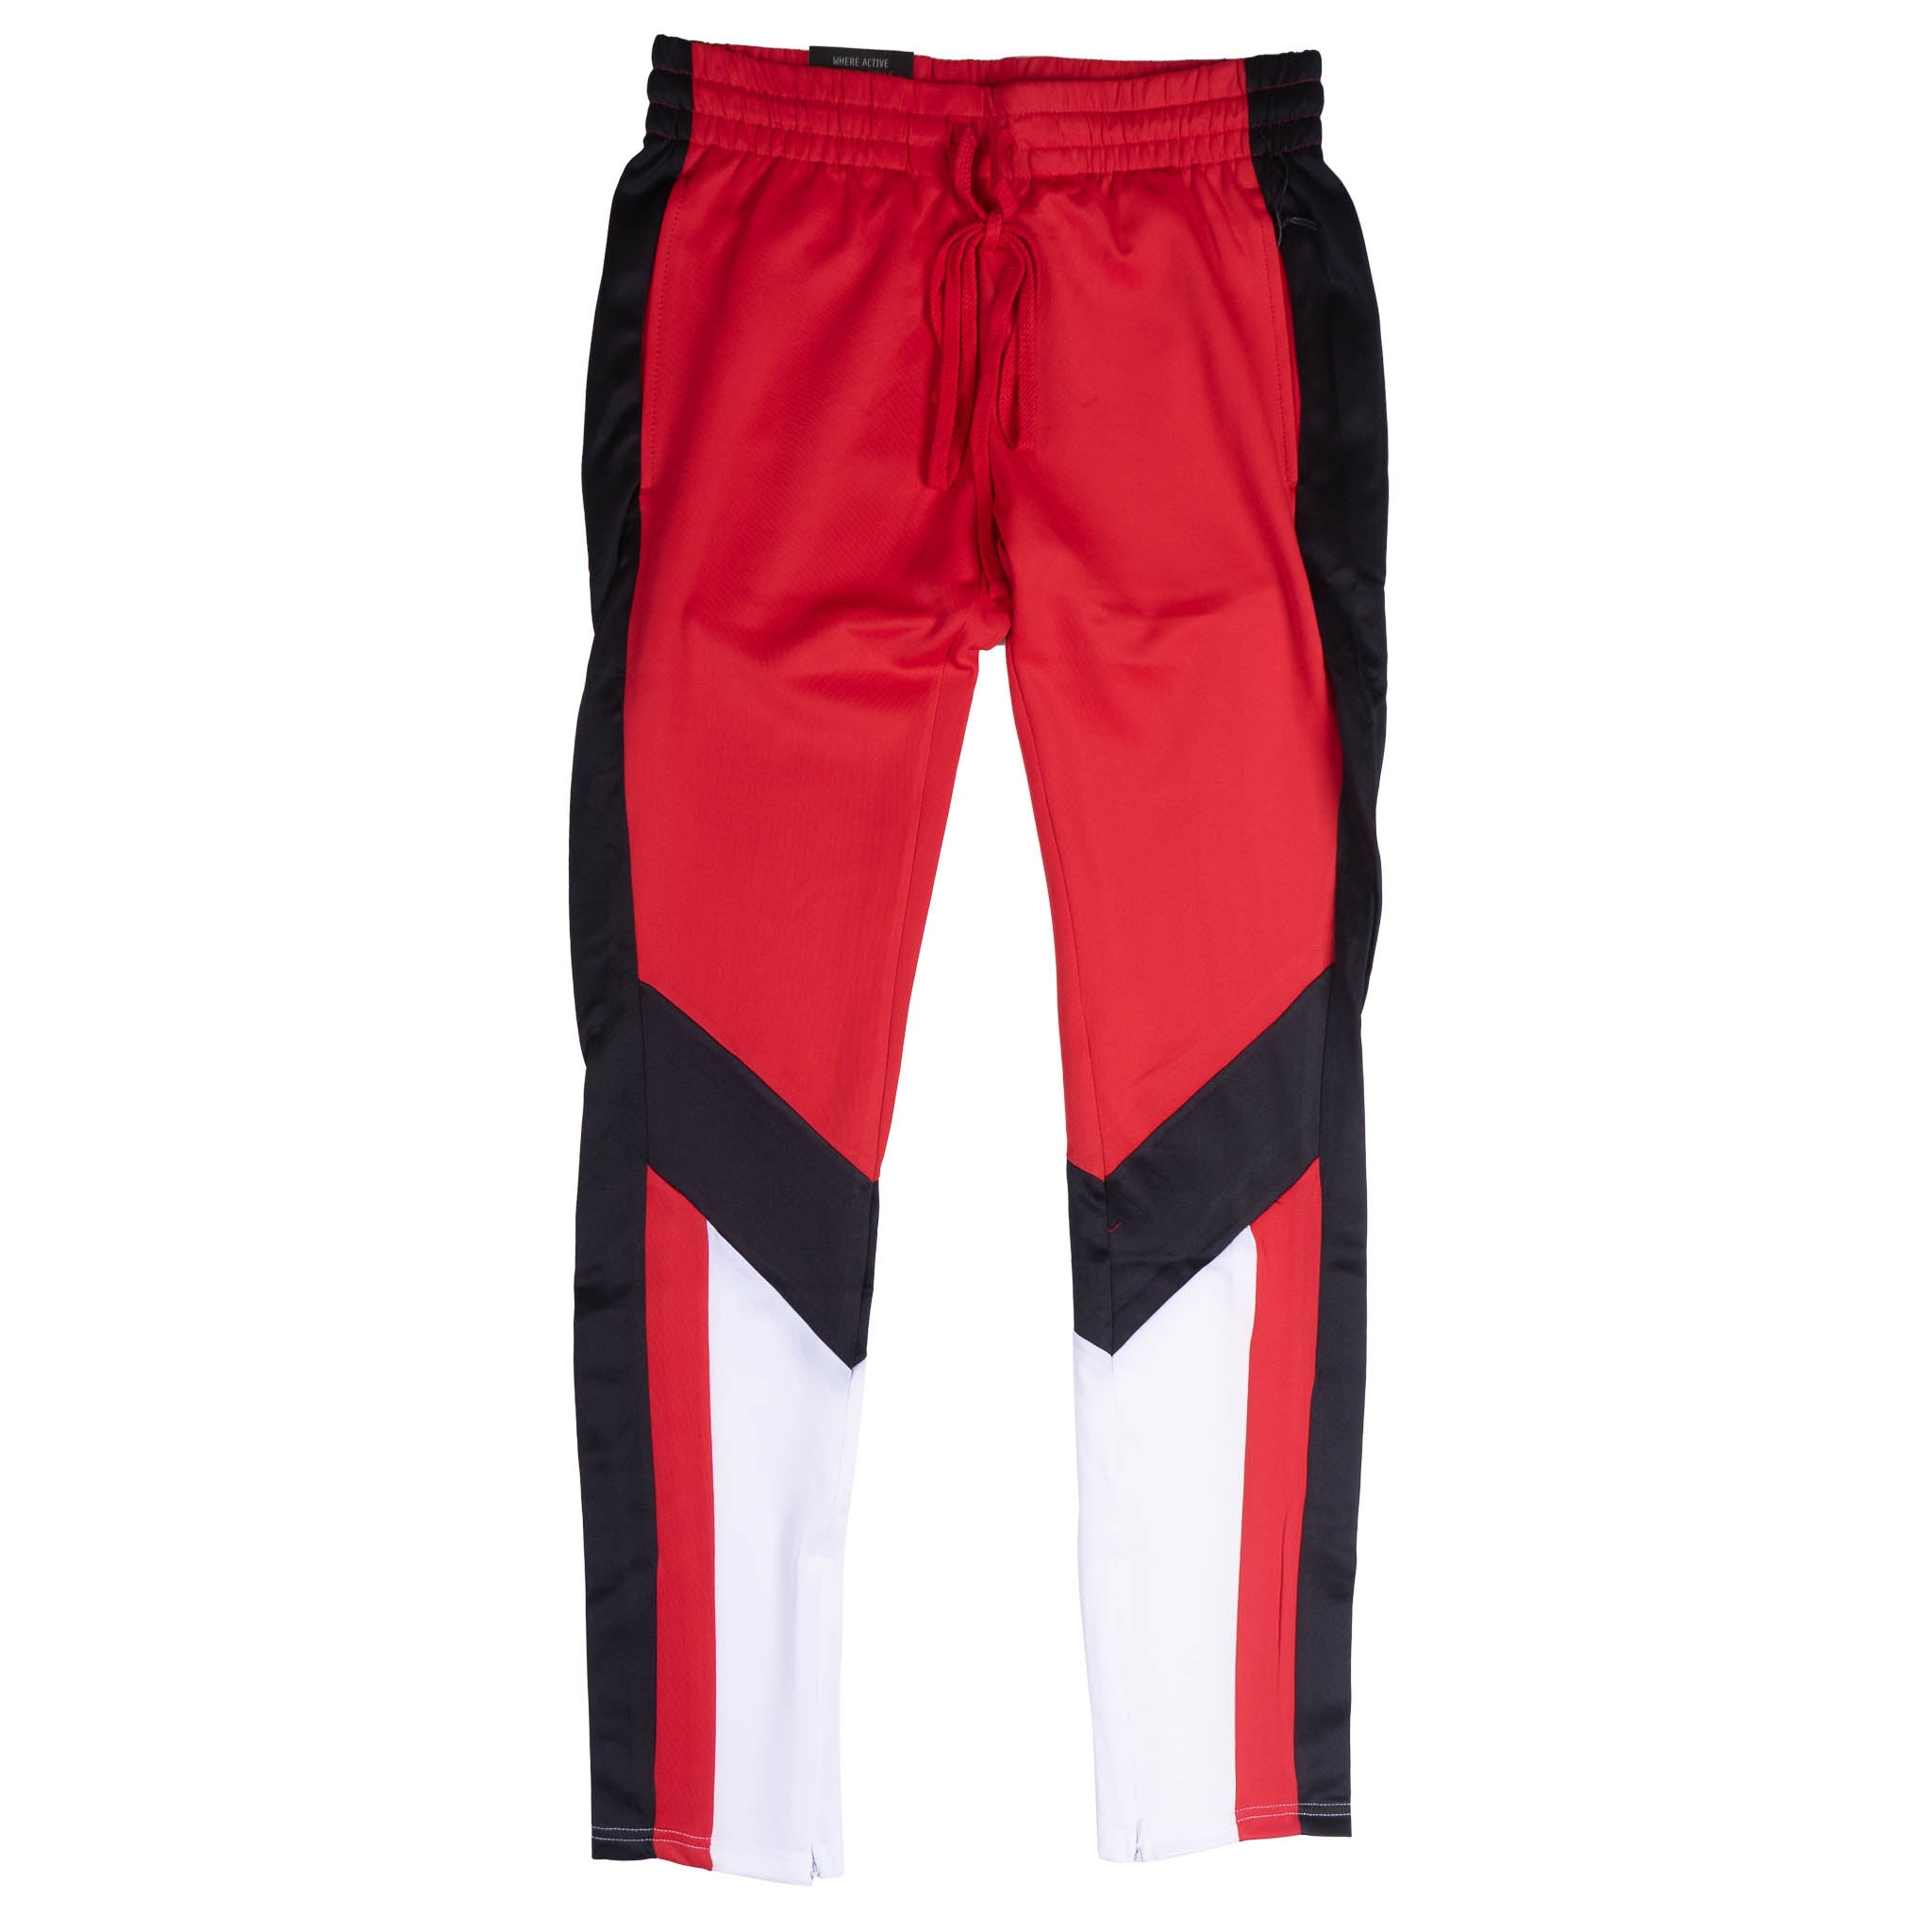 12 AM NATION COLOR BLOCK TRACK PANTS RED/BLACK/WHITE - 89213